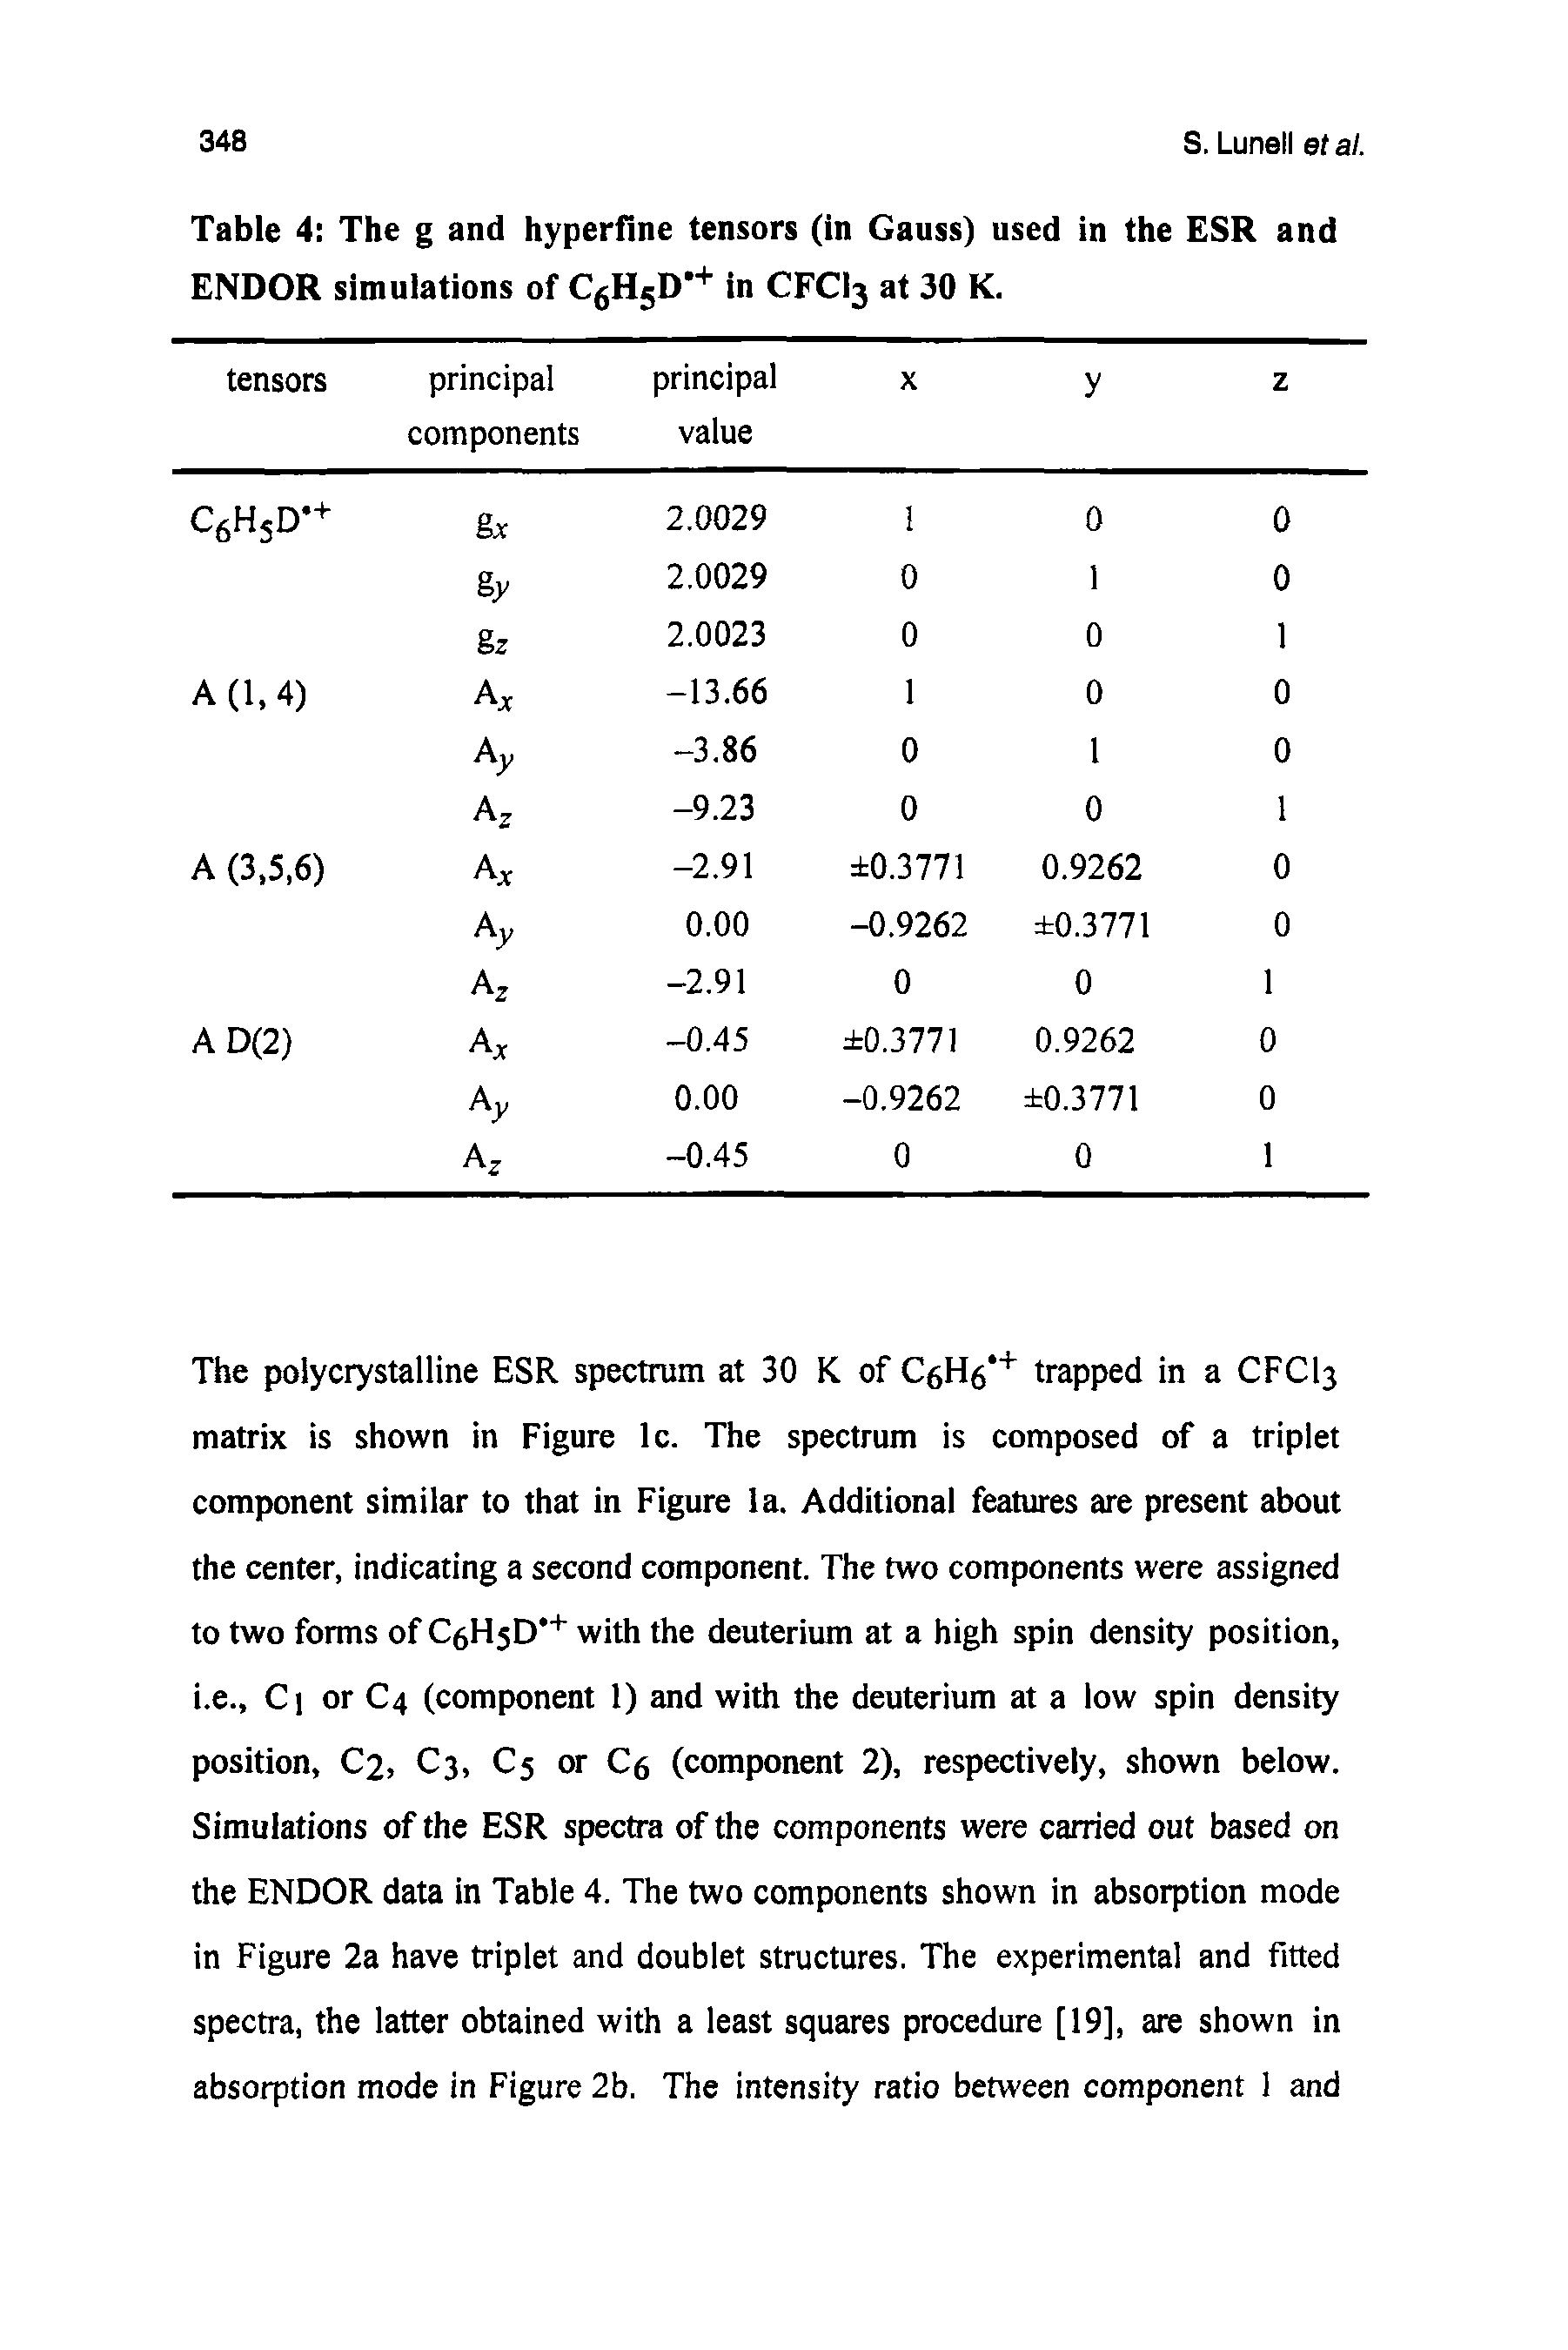 Table 4 The g and hyperfine tensors (in Gauss) used in the ESR and ENDOR simulations of C6H5D + in CFCI3 at 30 K.